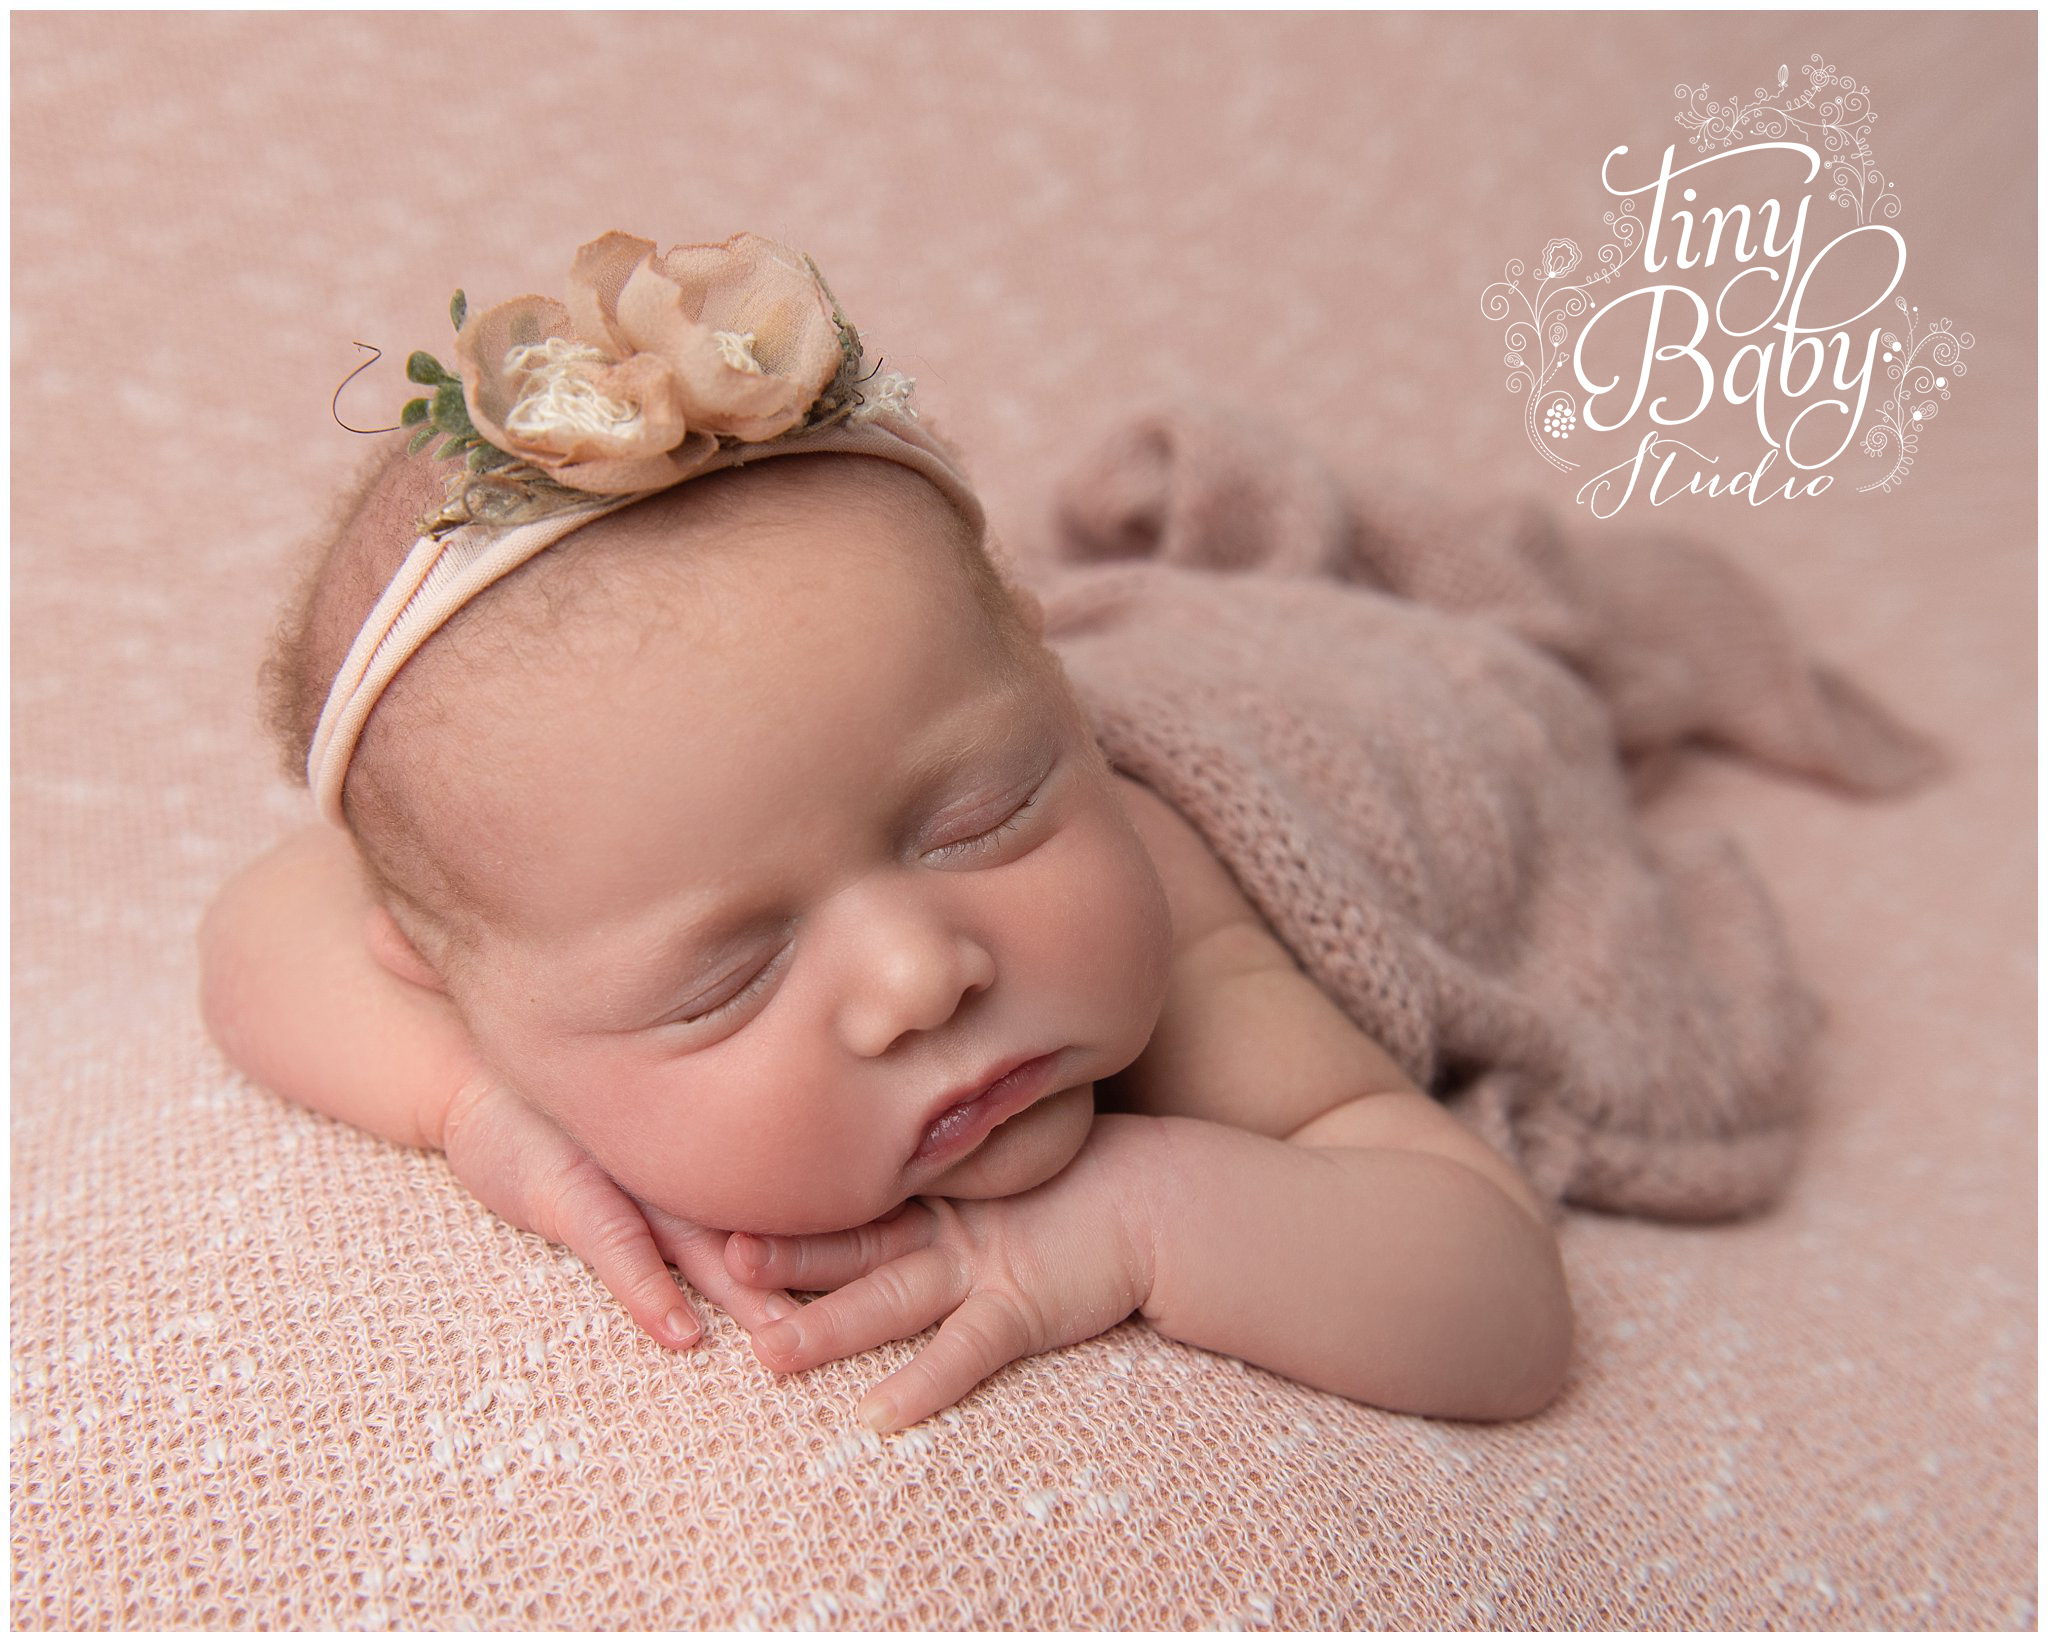 Newborn baby during photoshoot in comfortable props and wraps